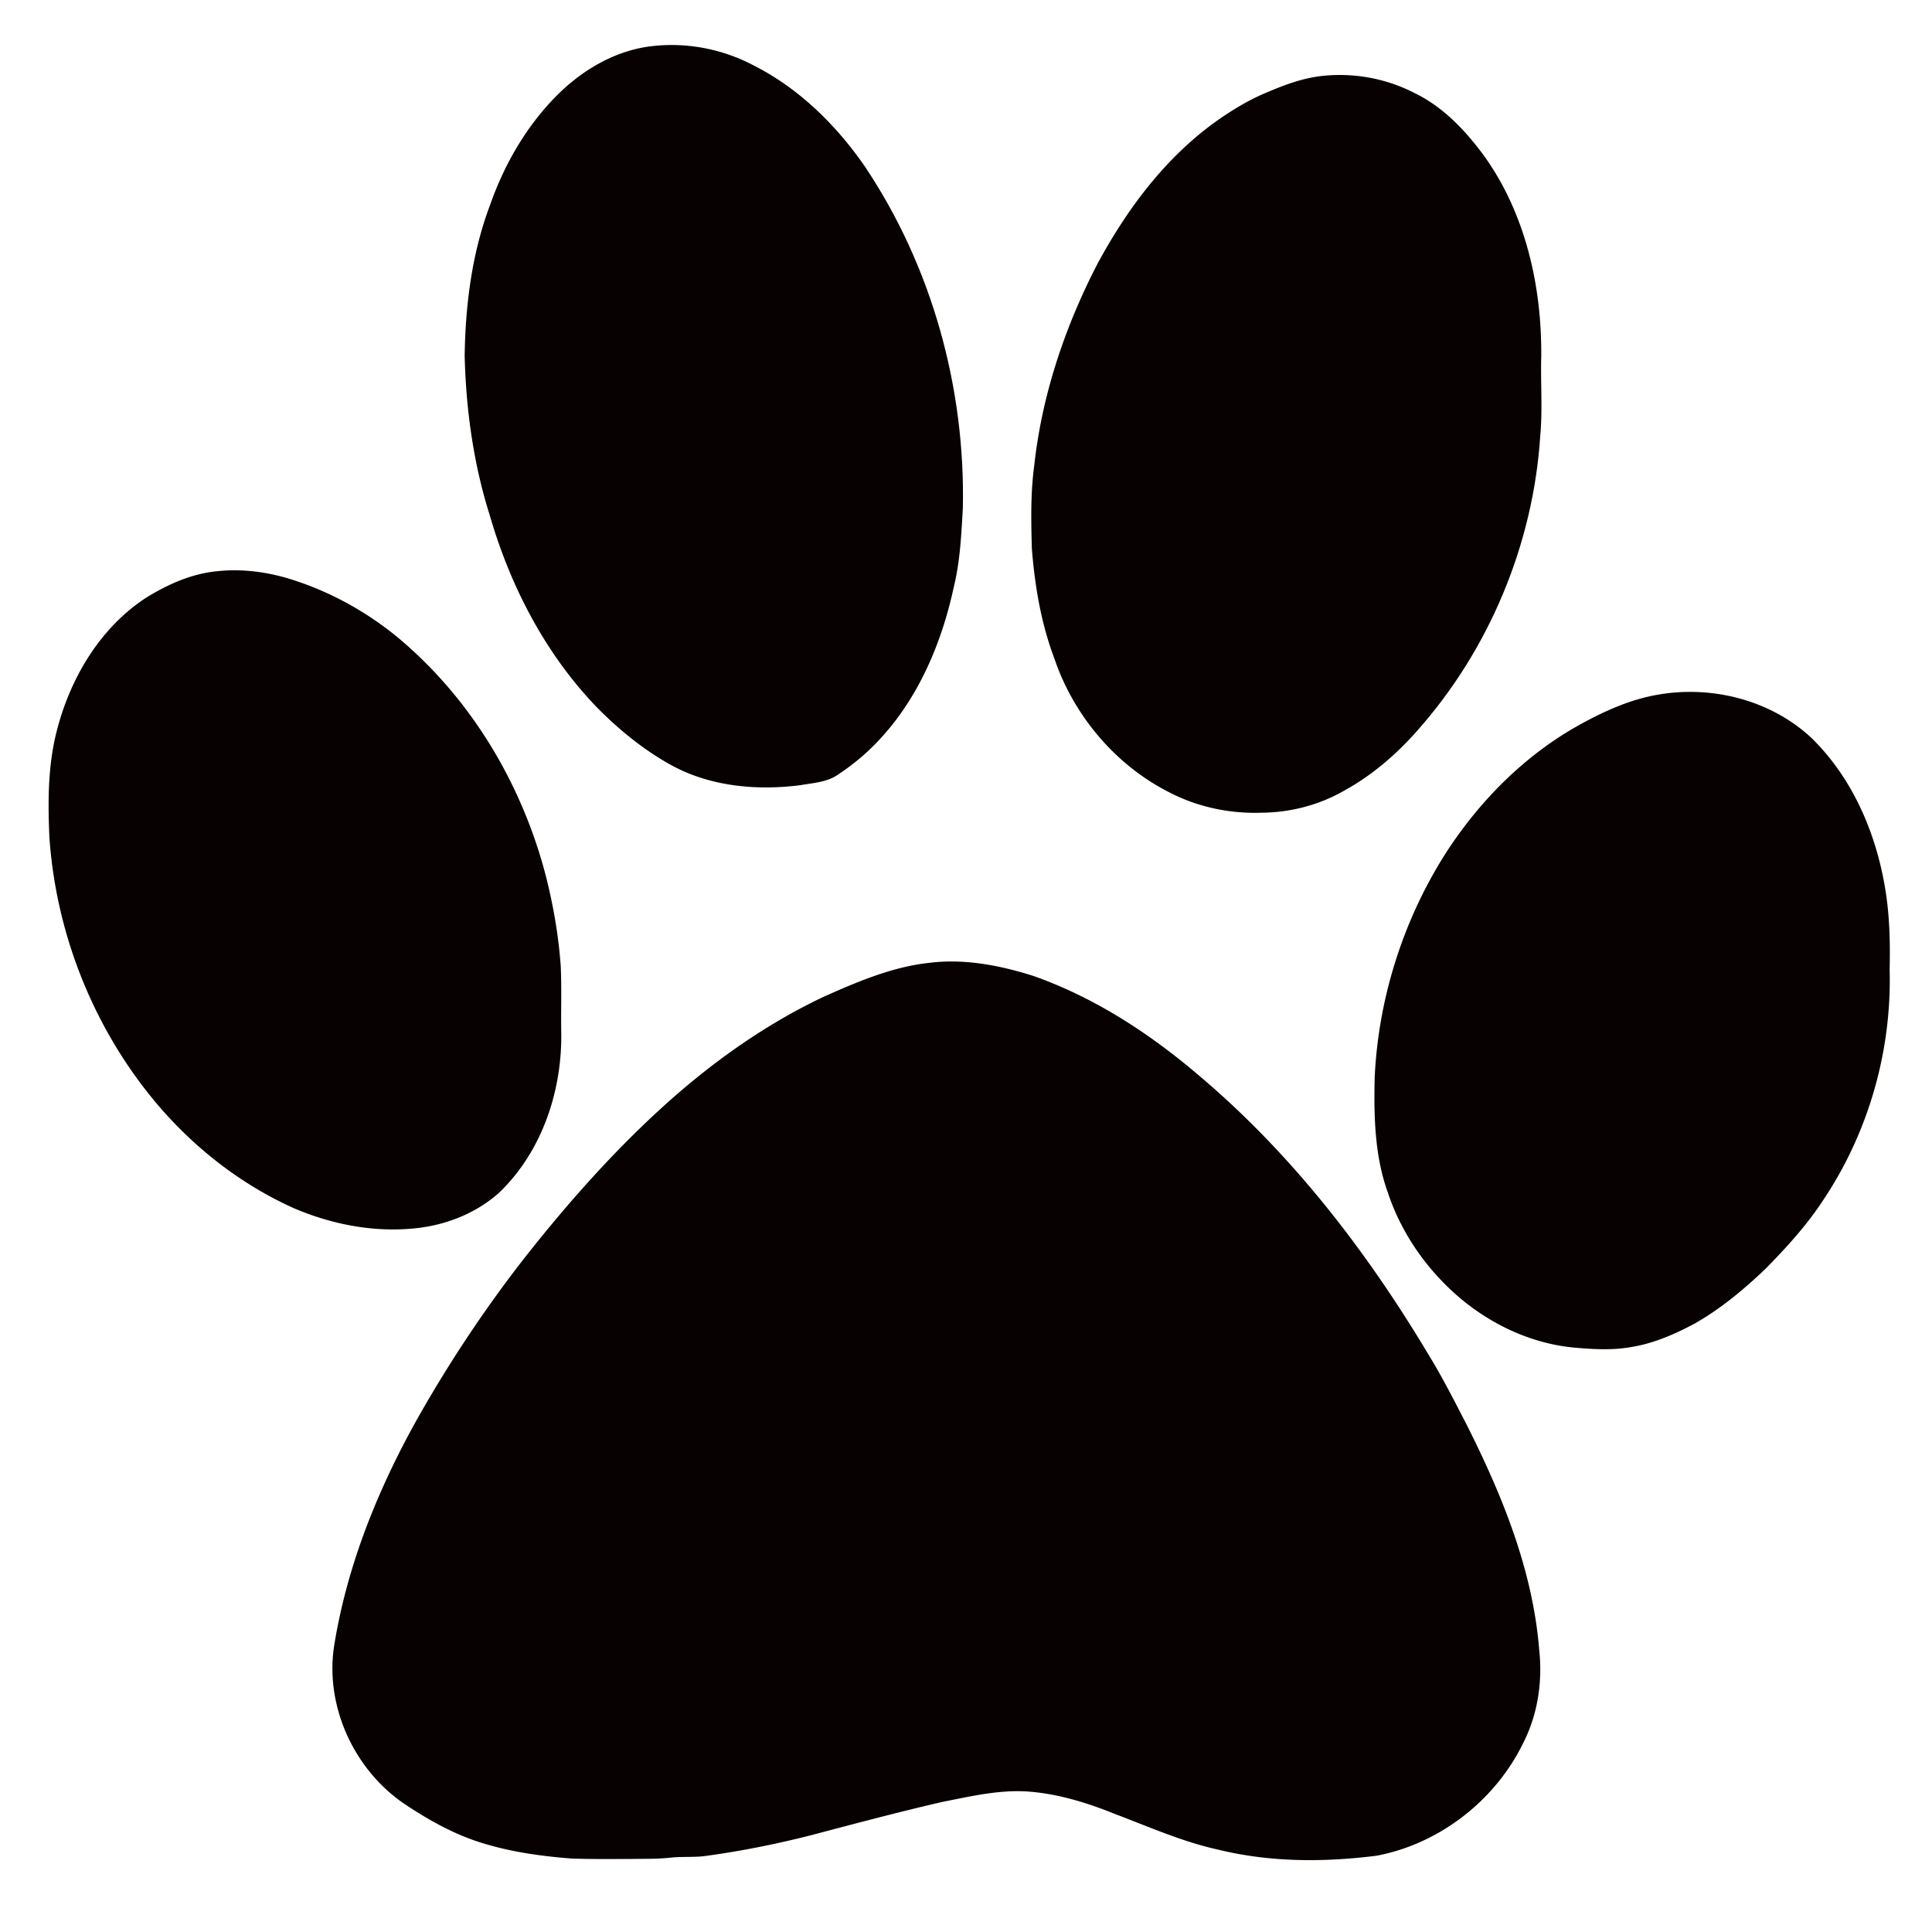 Paw print clip art. Yearbook clipart panther